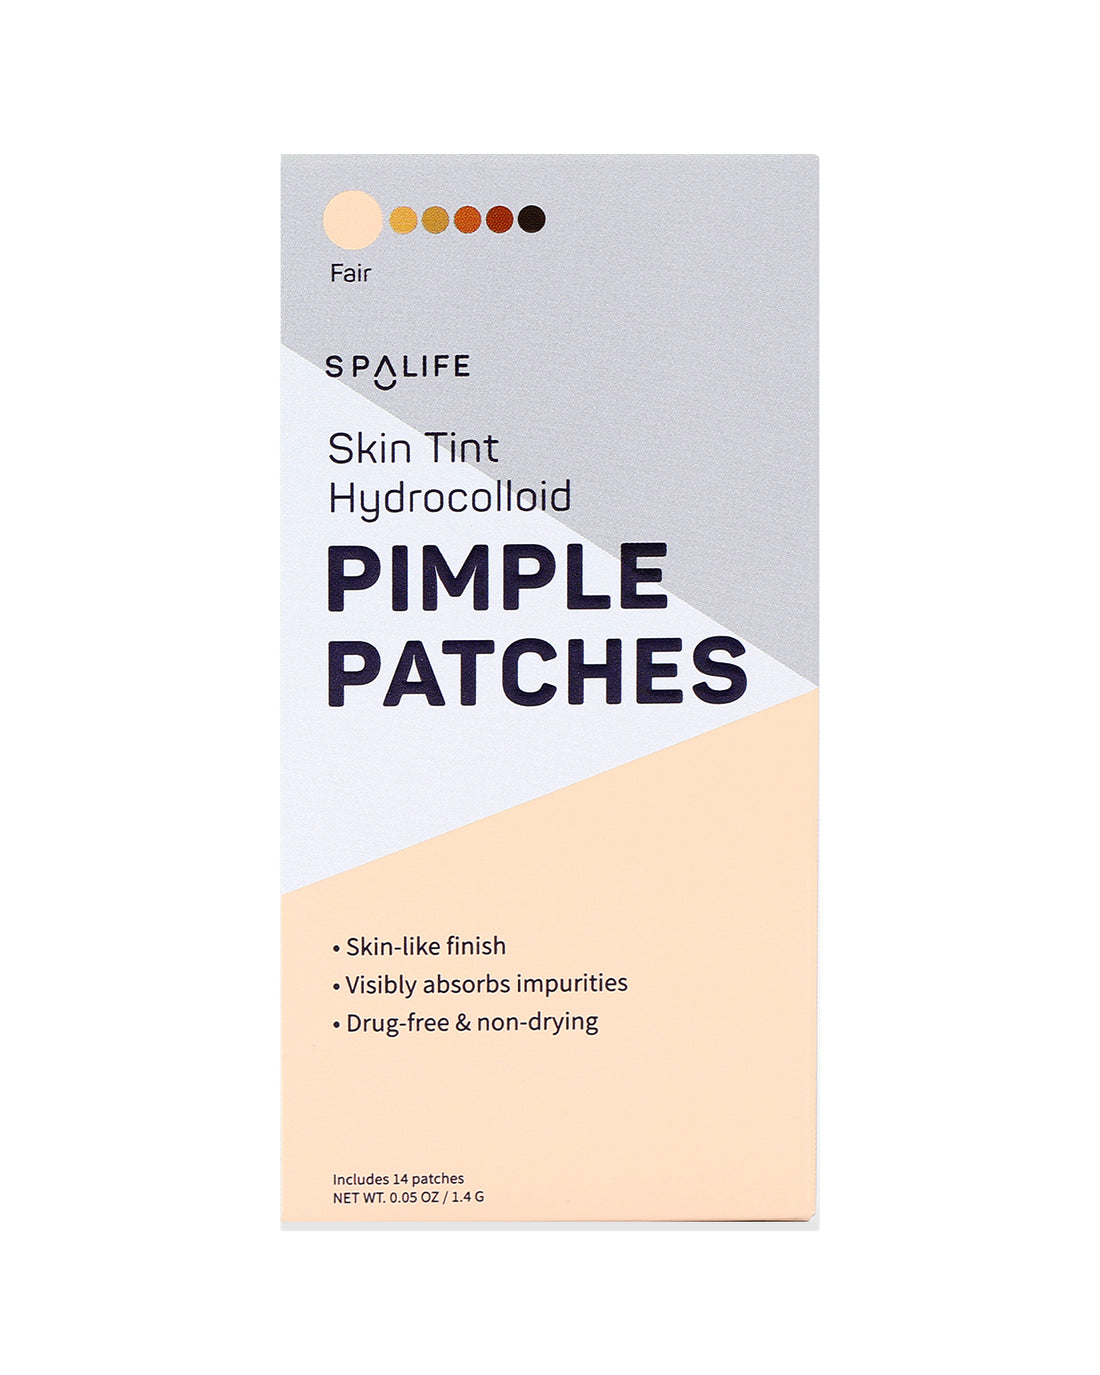 Skin_tint_pimple_patches_packe-94